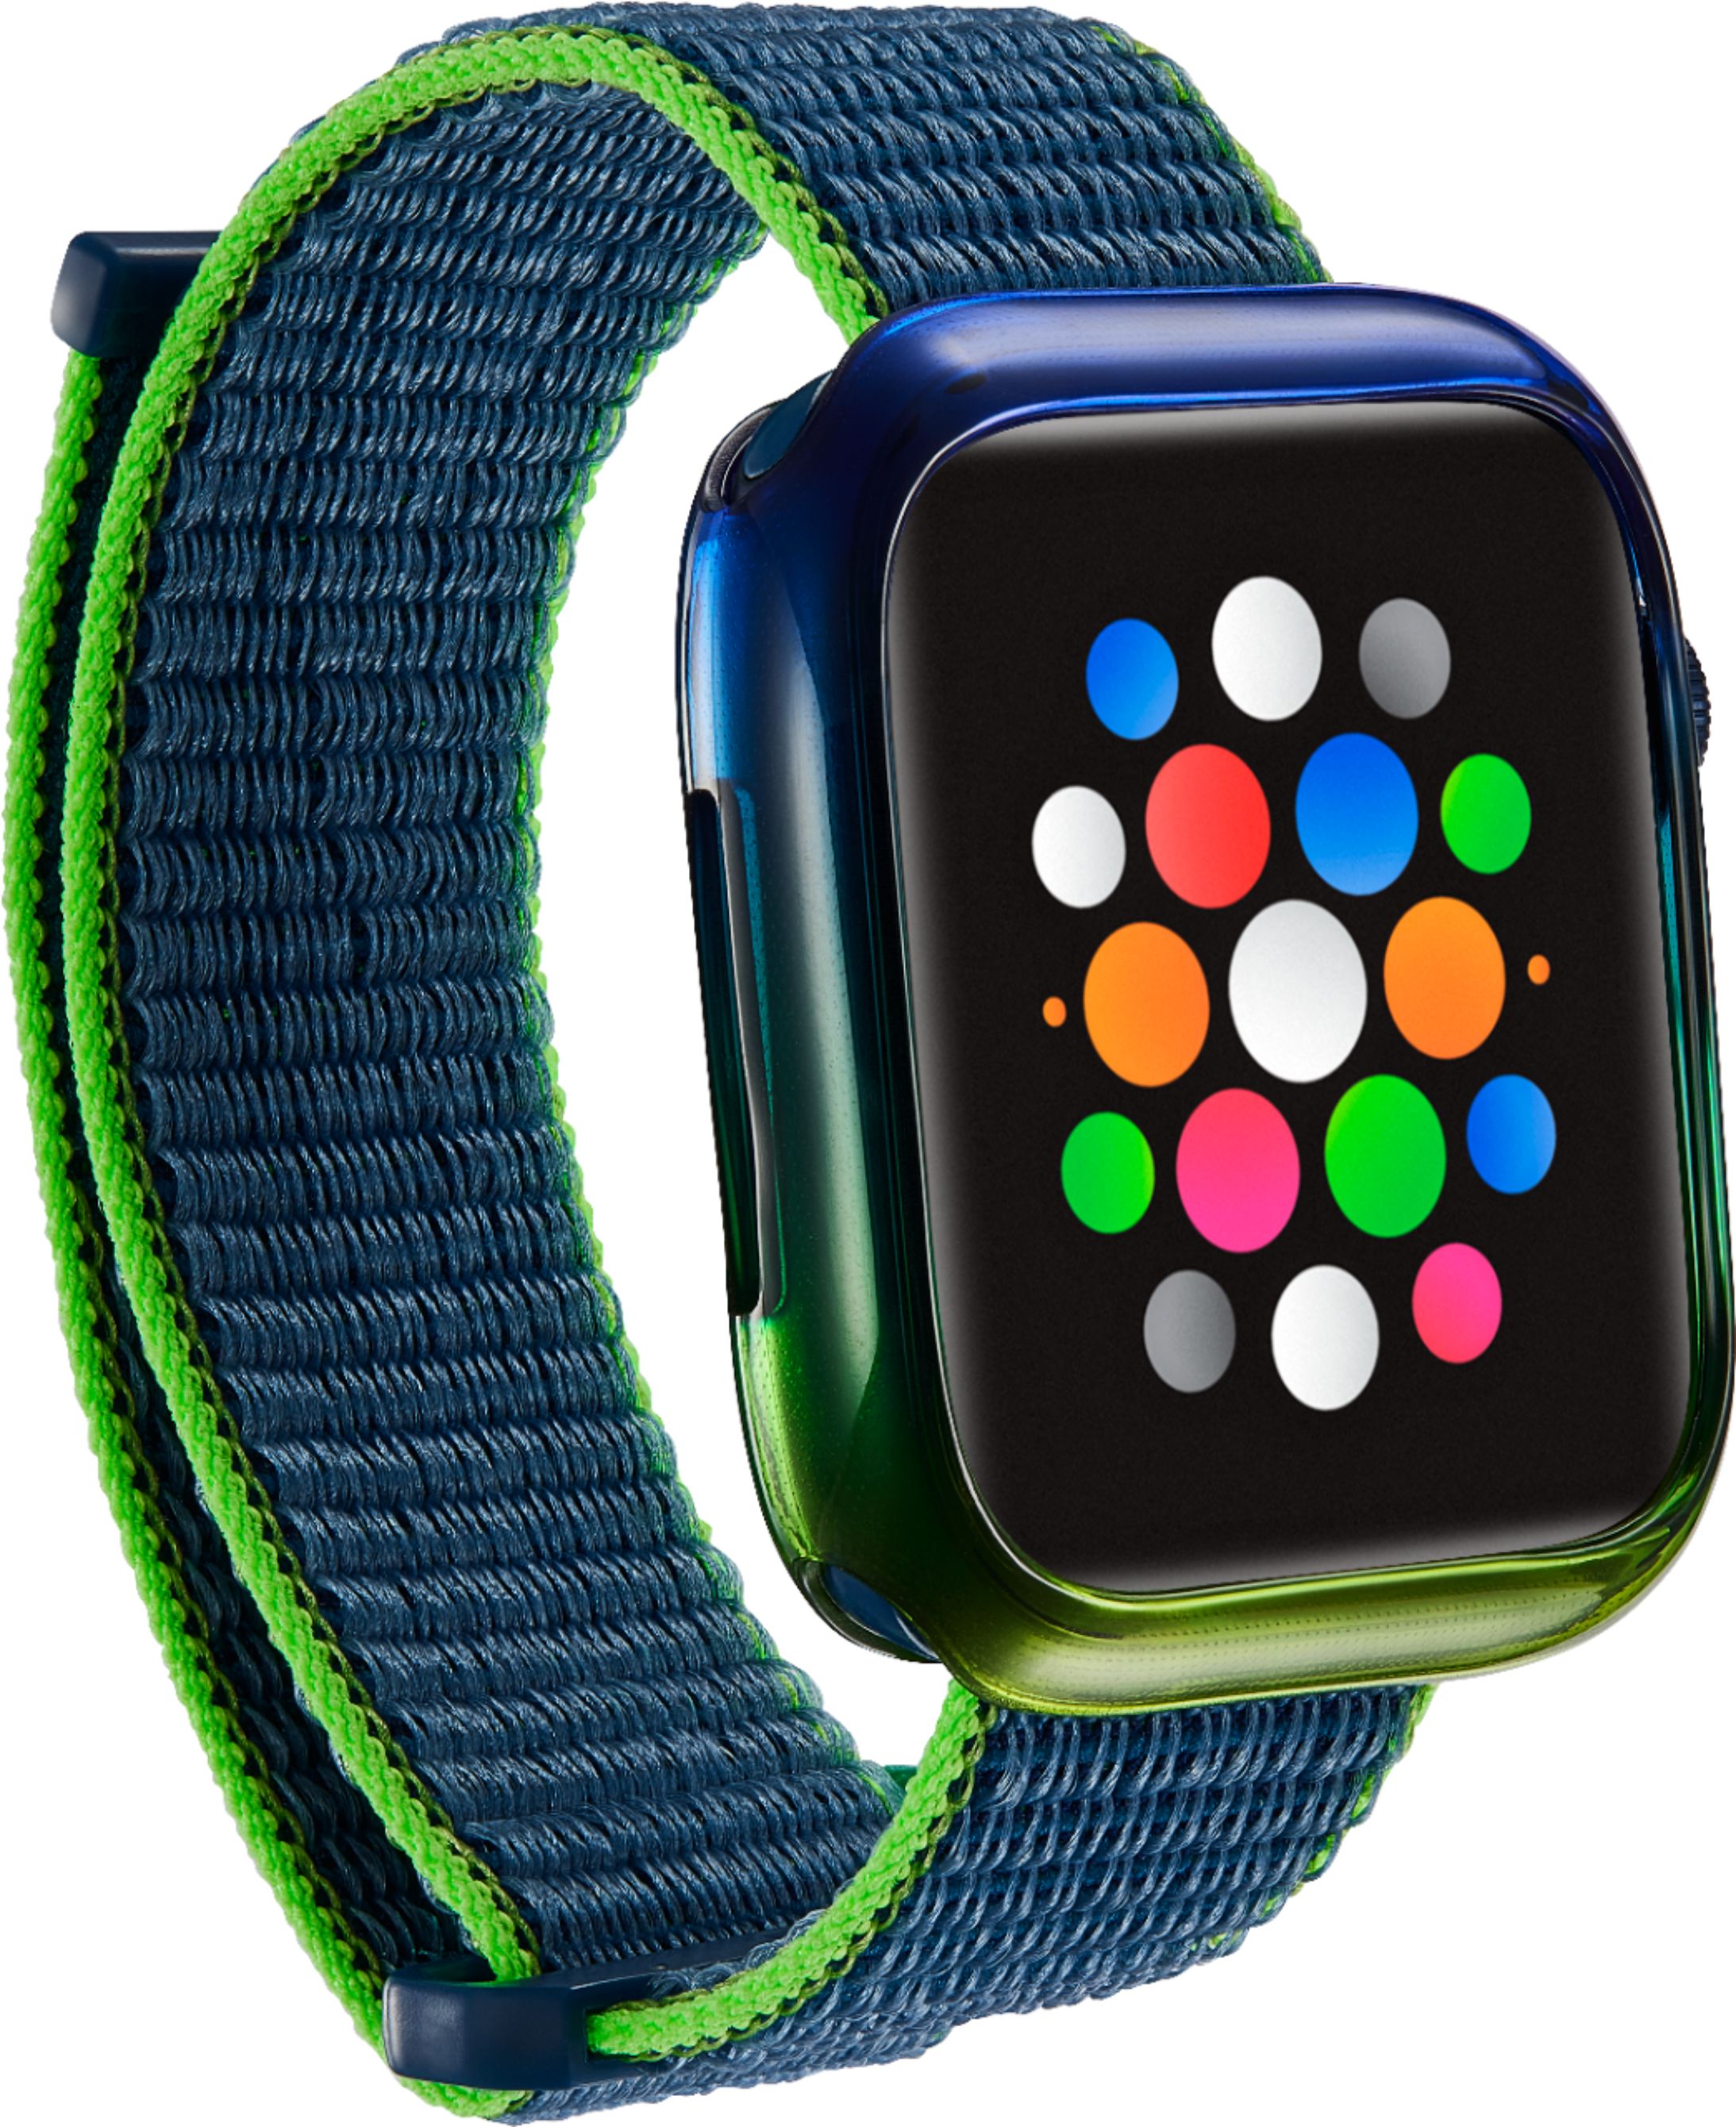 Modal™ Nylon Watch Band and Bumper Case For Apple